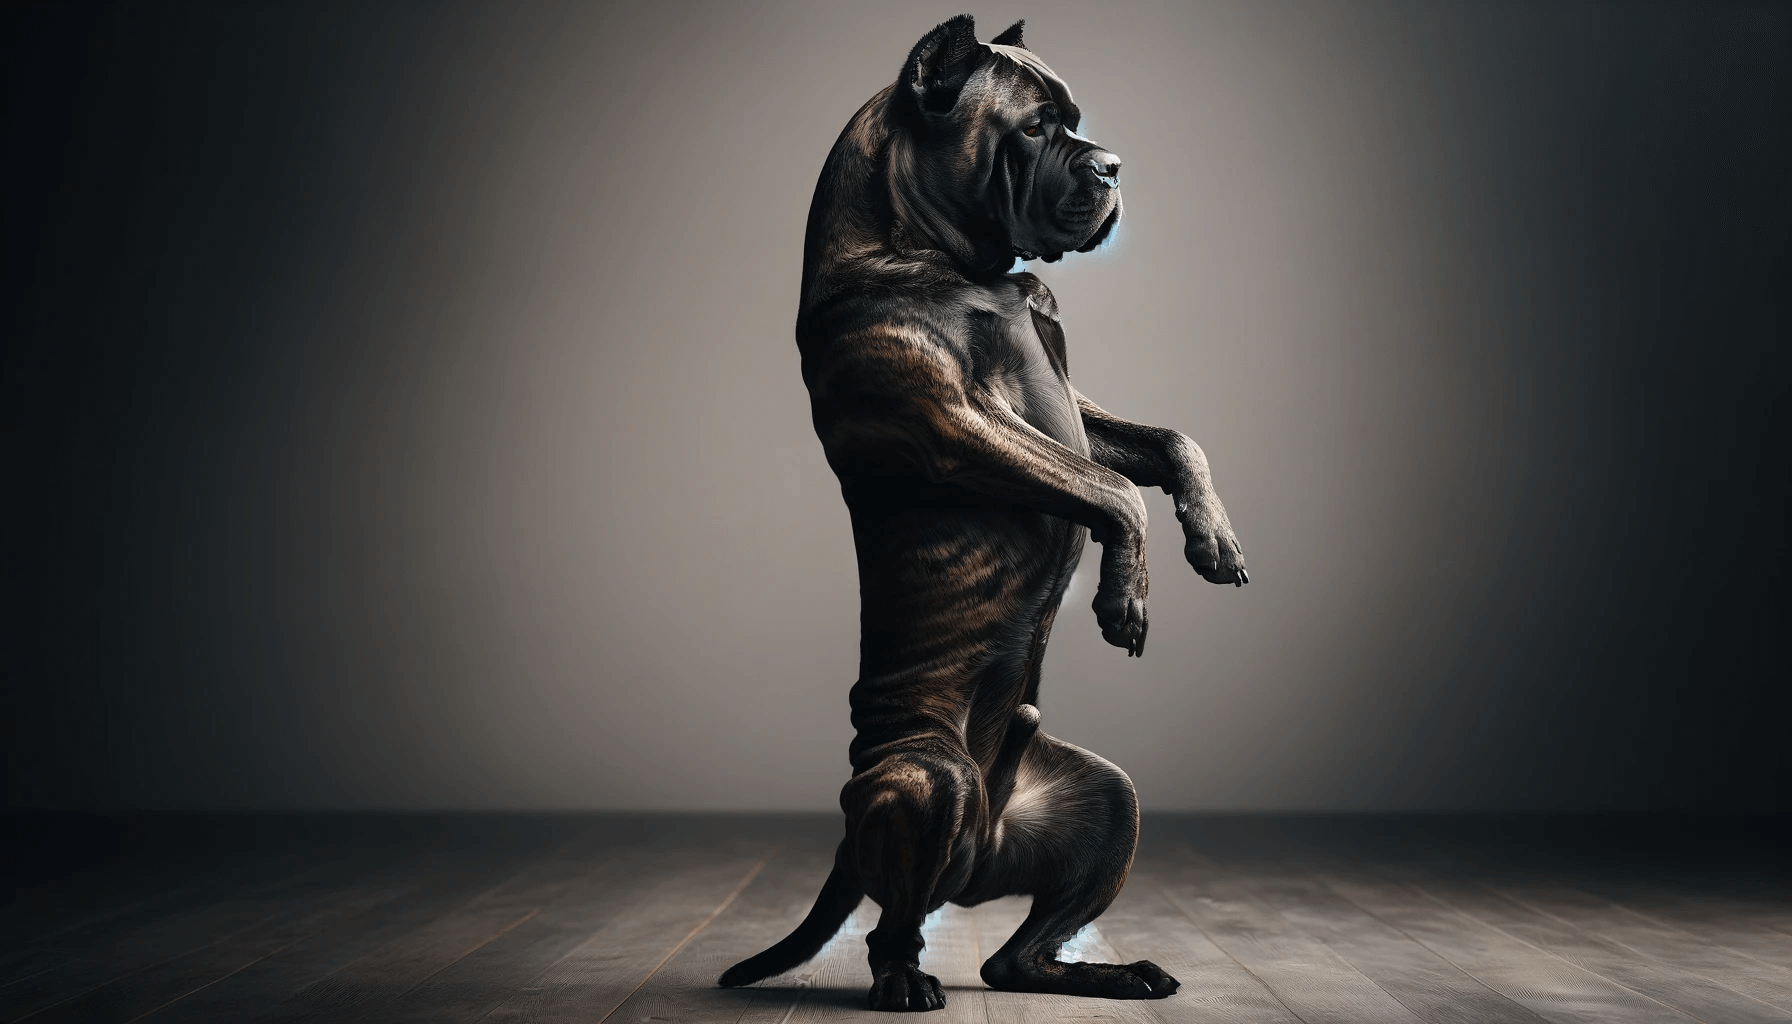 A brindle Cane Corso dog standing upright on its hind legs, showcasing its training and balance, highlighting its impressive abilities.